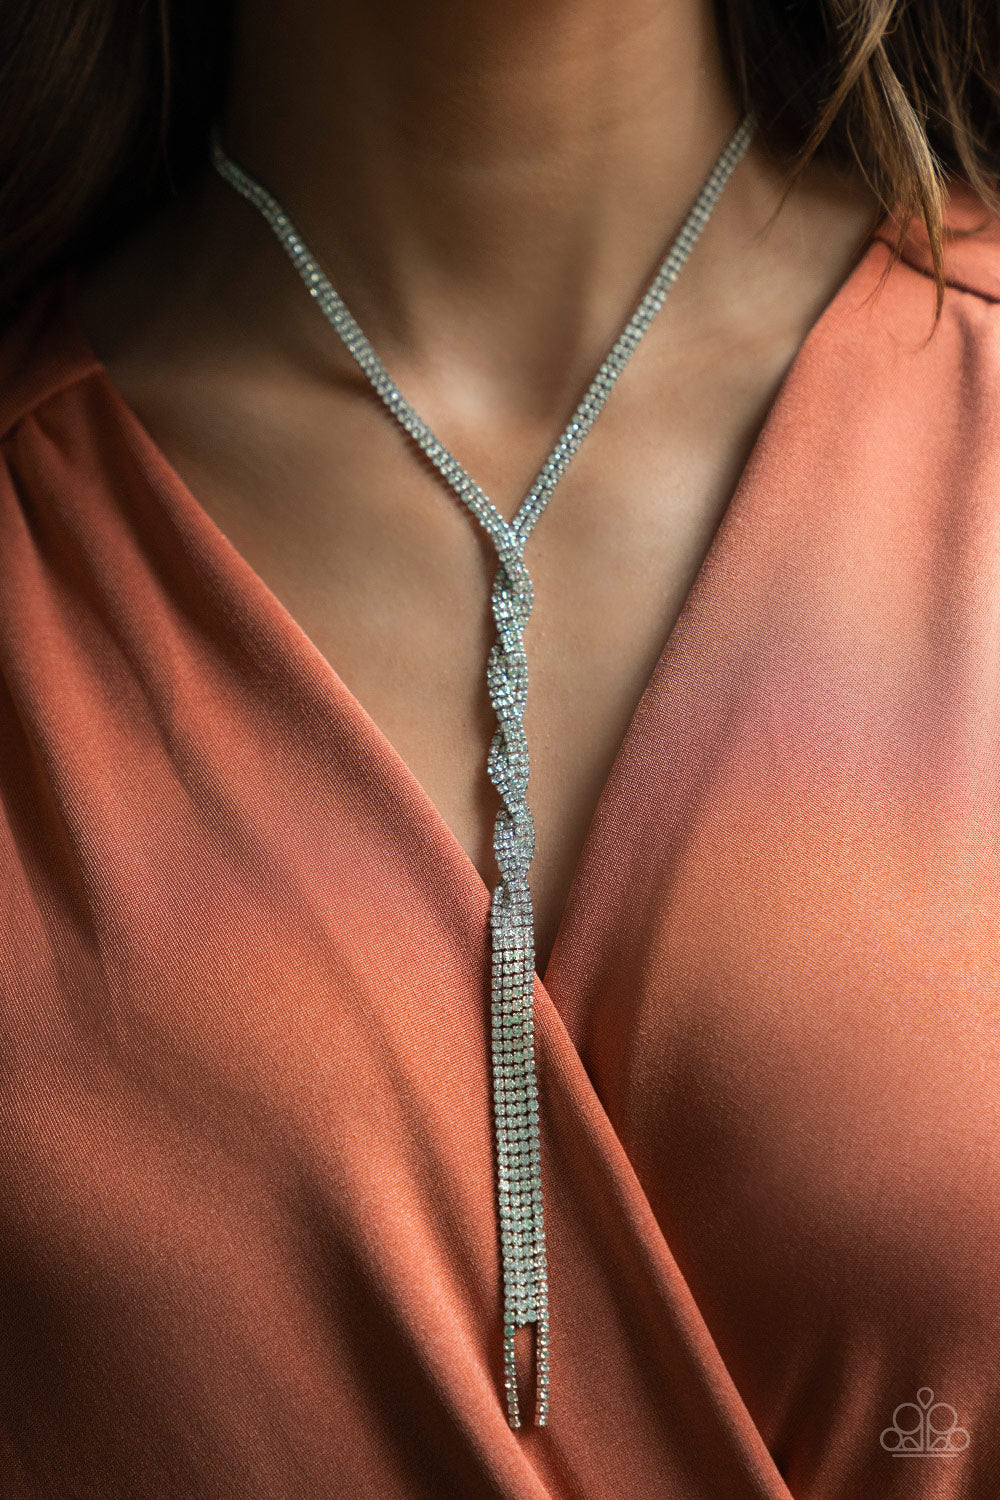 Impressively Icy - White Necklace - Life of the Party Exclusive March 2022